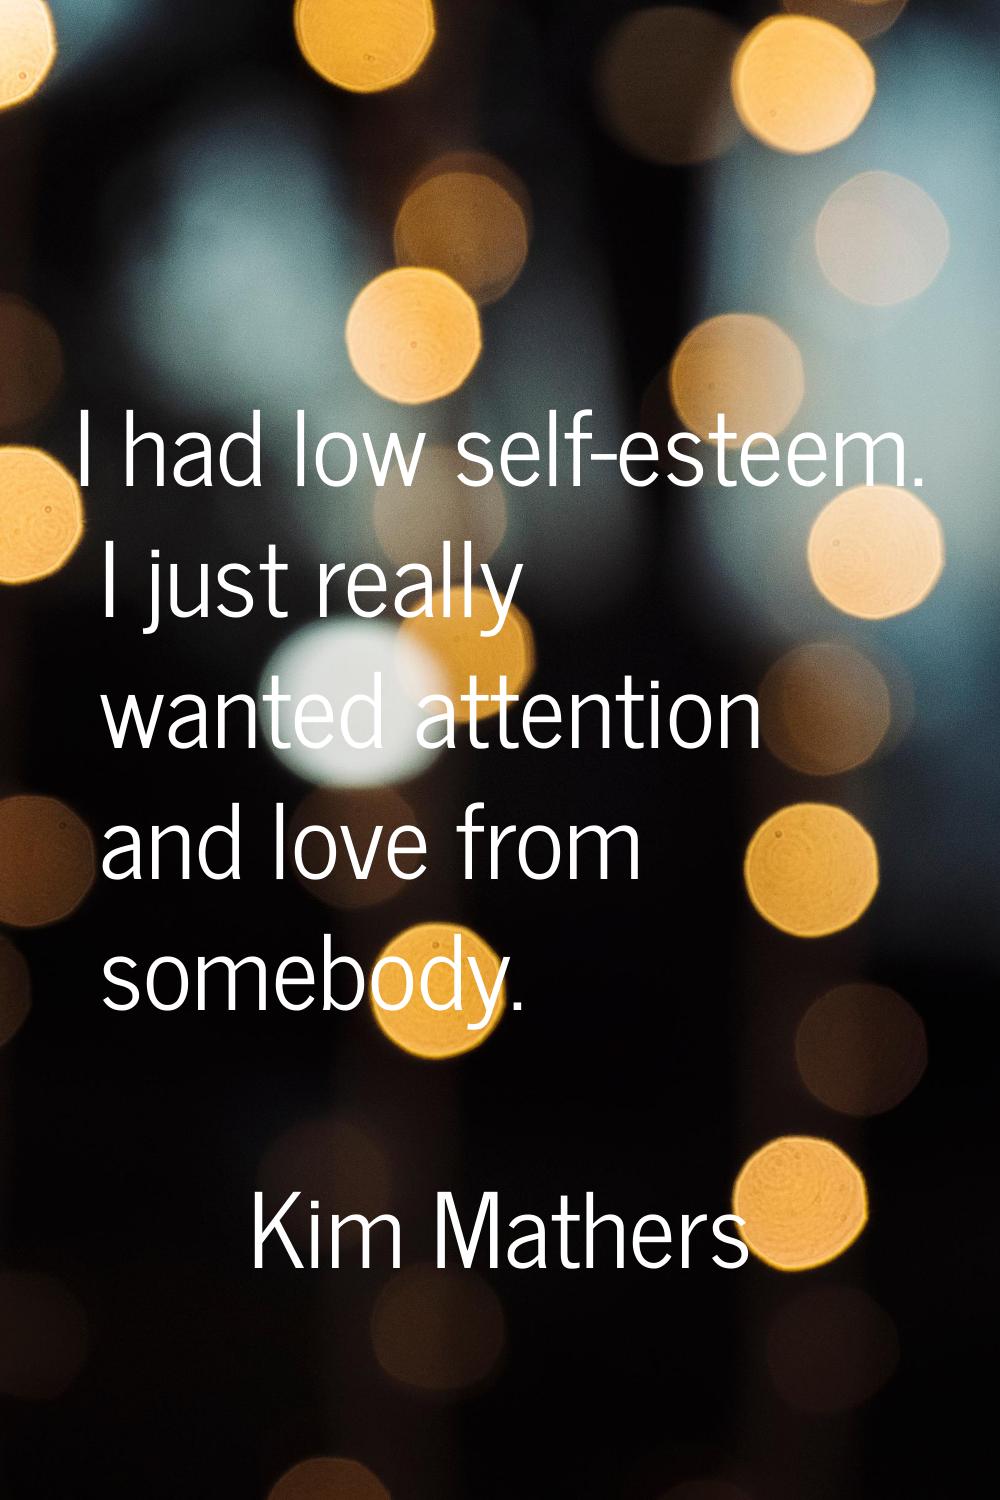 I had low self-esteem. I just really wanted attention and love from somebody.